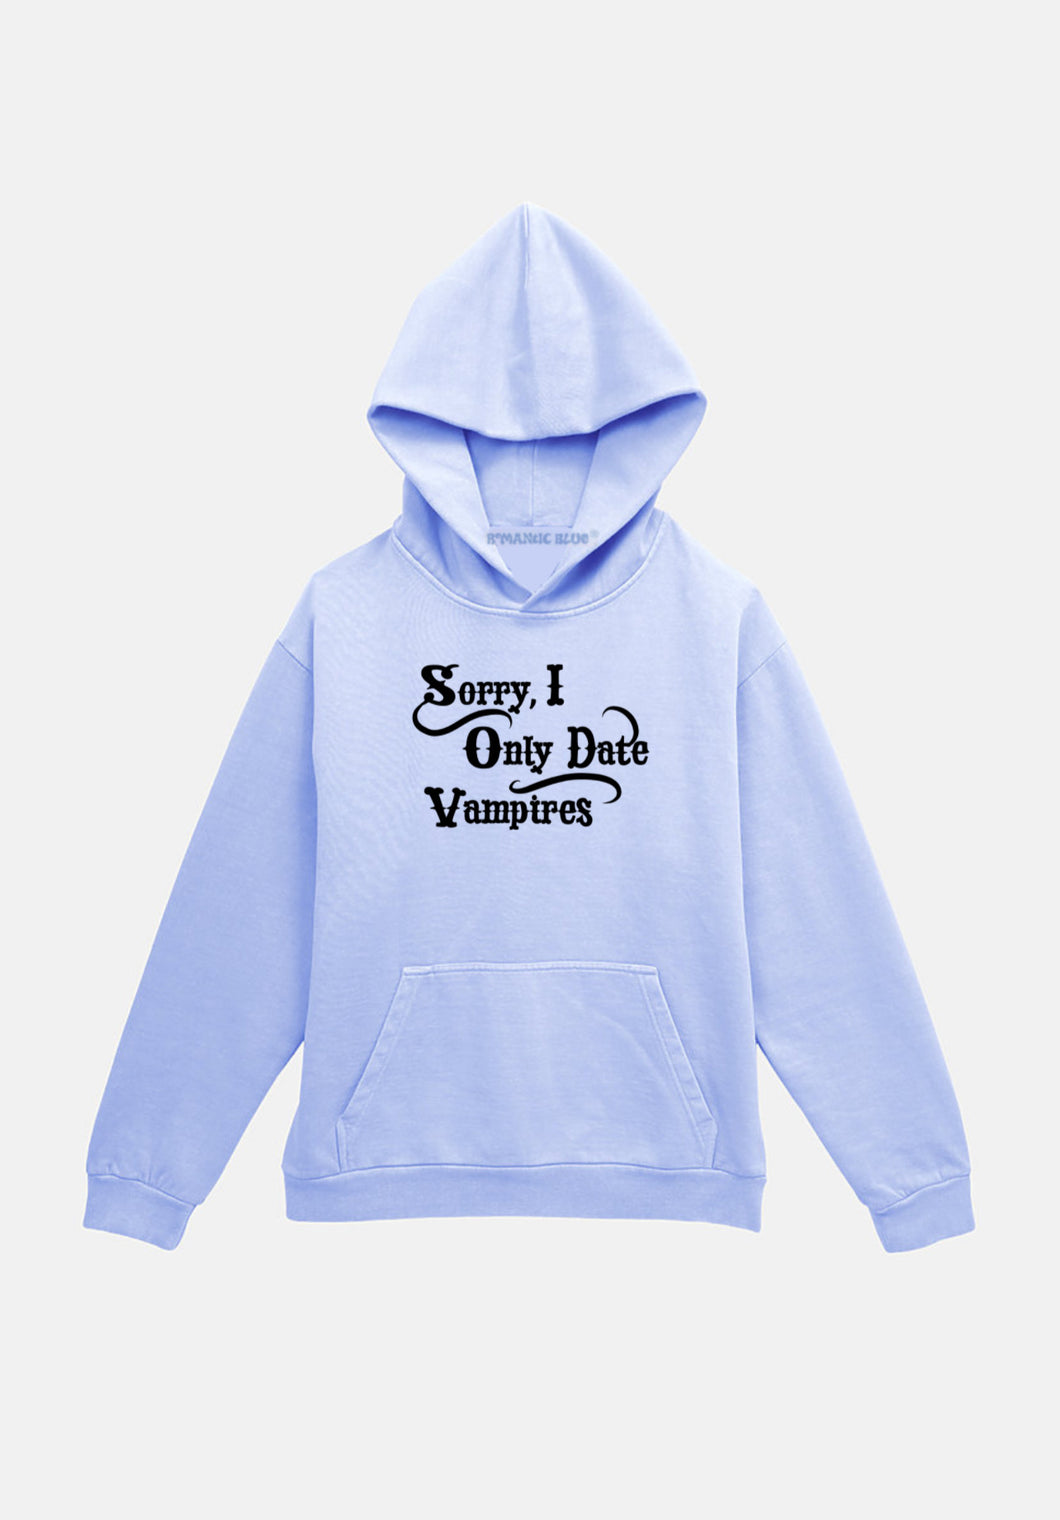 Sorry I Only Date Vampires Hoodie - Blue